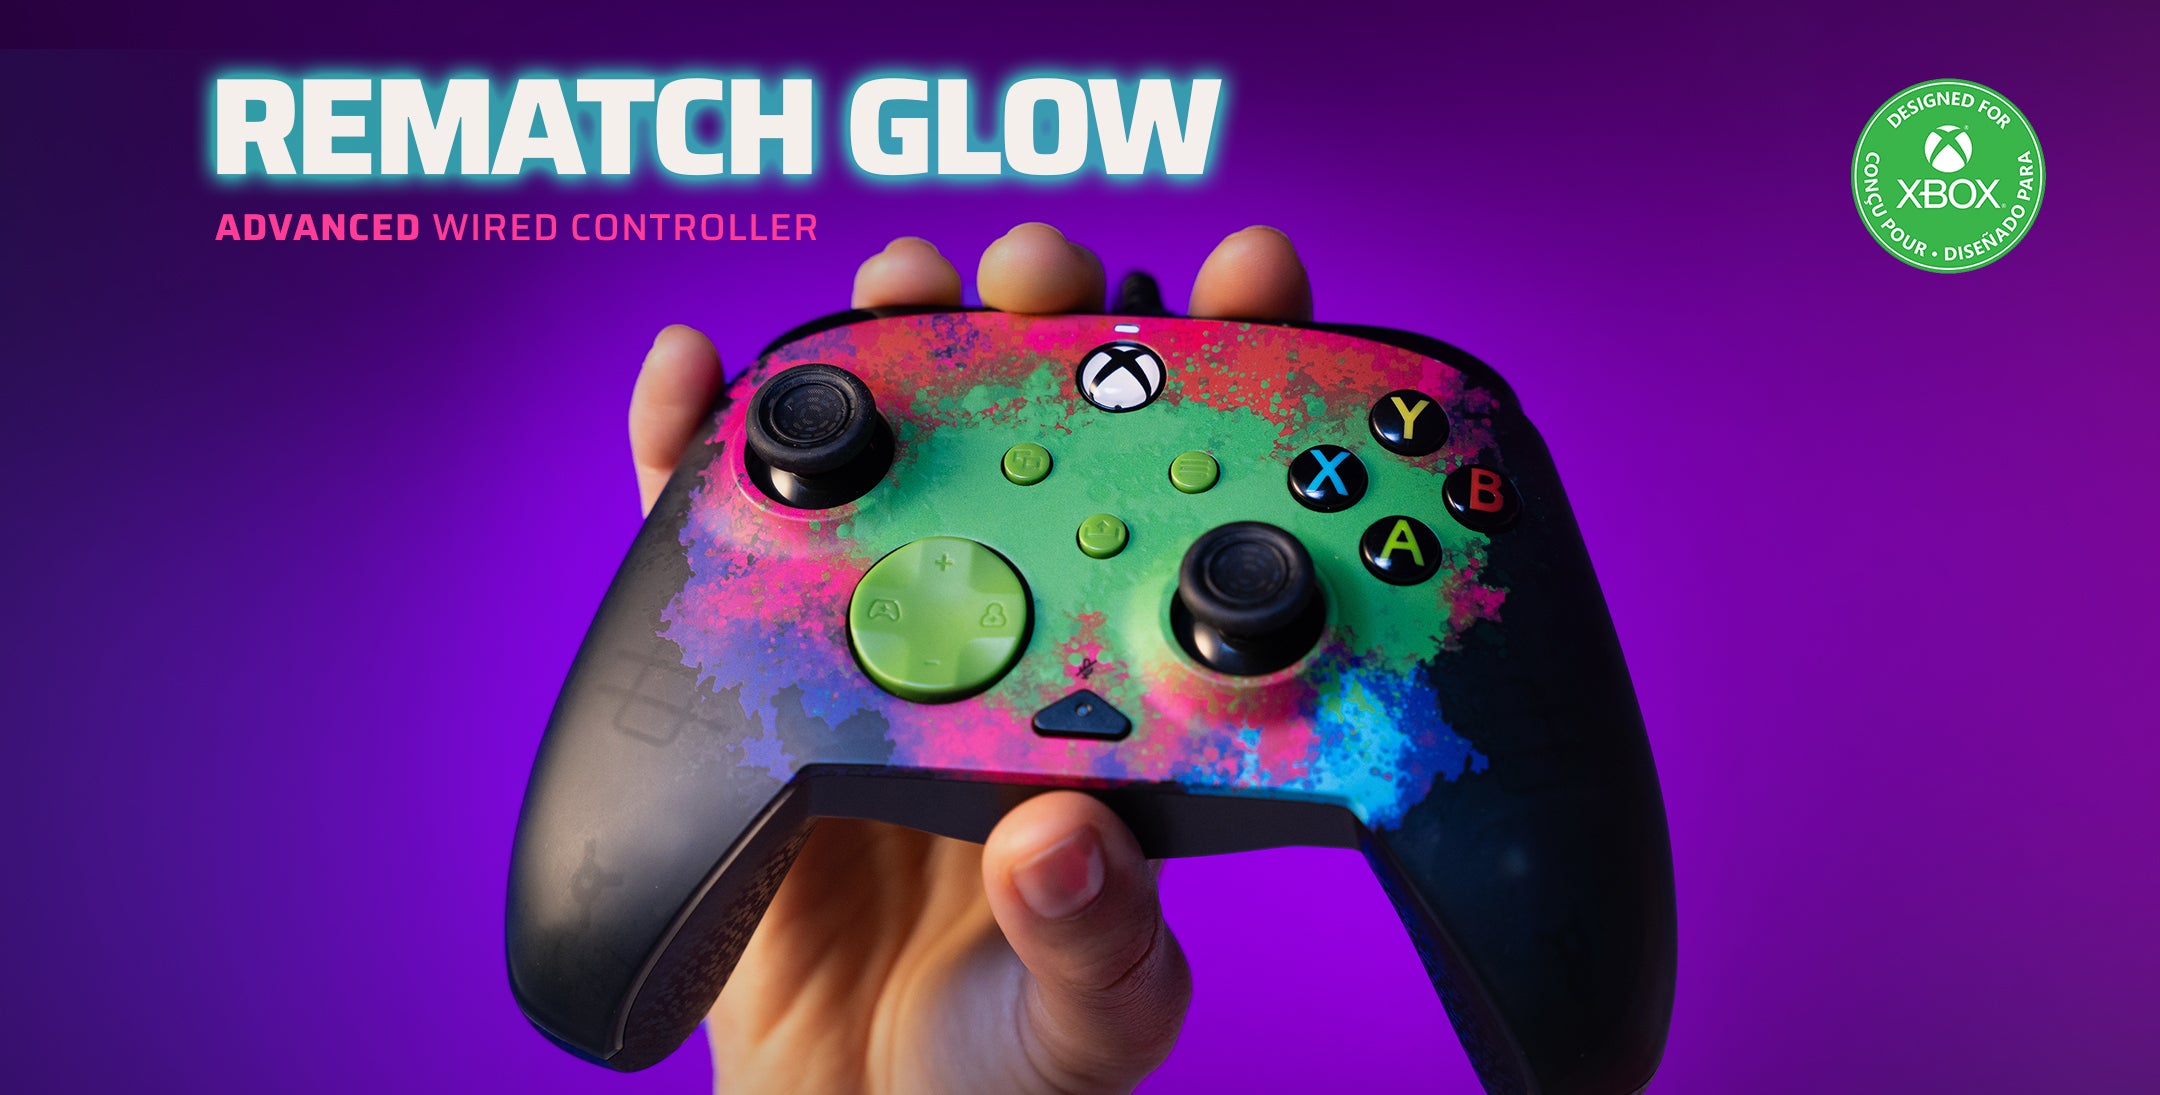 Xbox Series X|S & PC Space Dust REMATCH GLOW Advanced Wired Controller